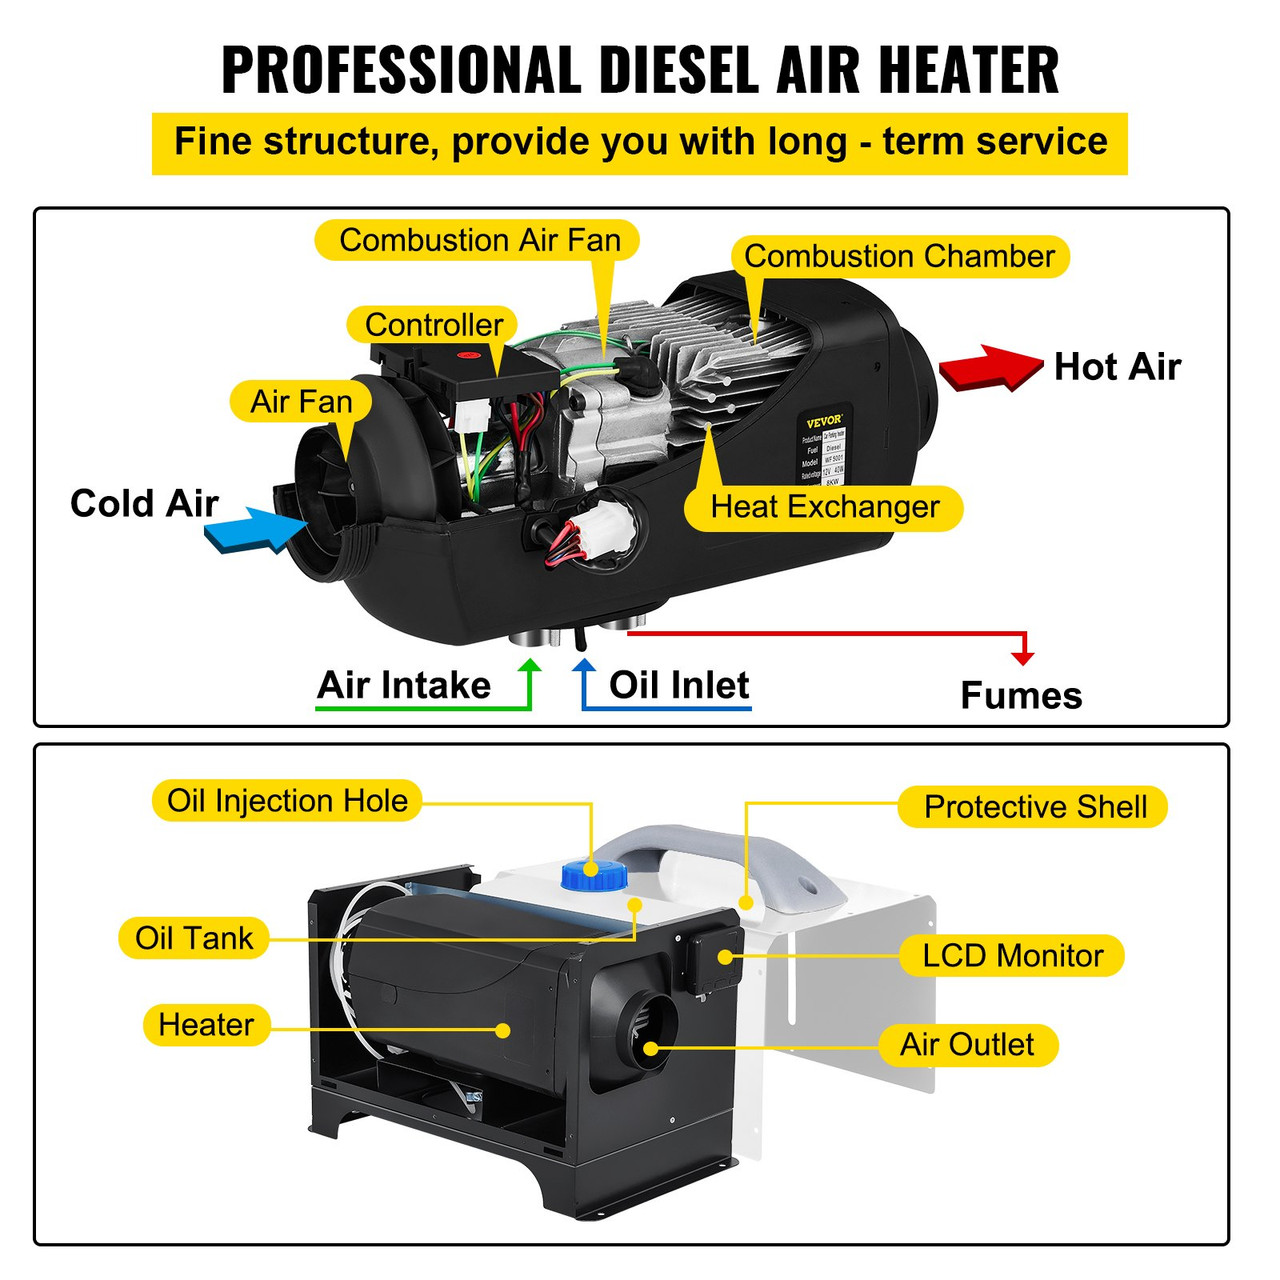 Diesel Air Heater 8KW Parking Heater 12V Truck Heater, One Air Outlet, with Black LCD Switch, Remote Control, Fast Heating Compact Diesel Heater, For Car, RV Truck, Boat, Campervans, Caravans